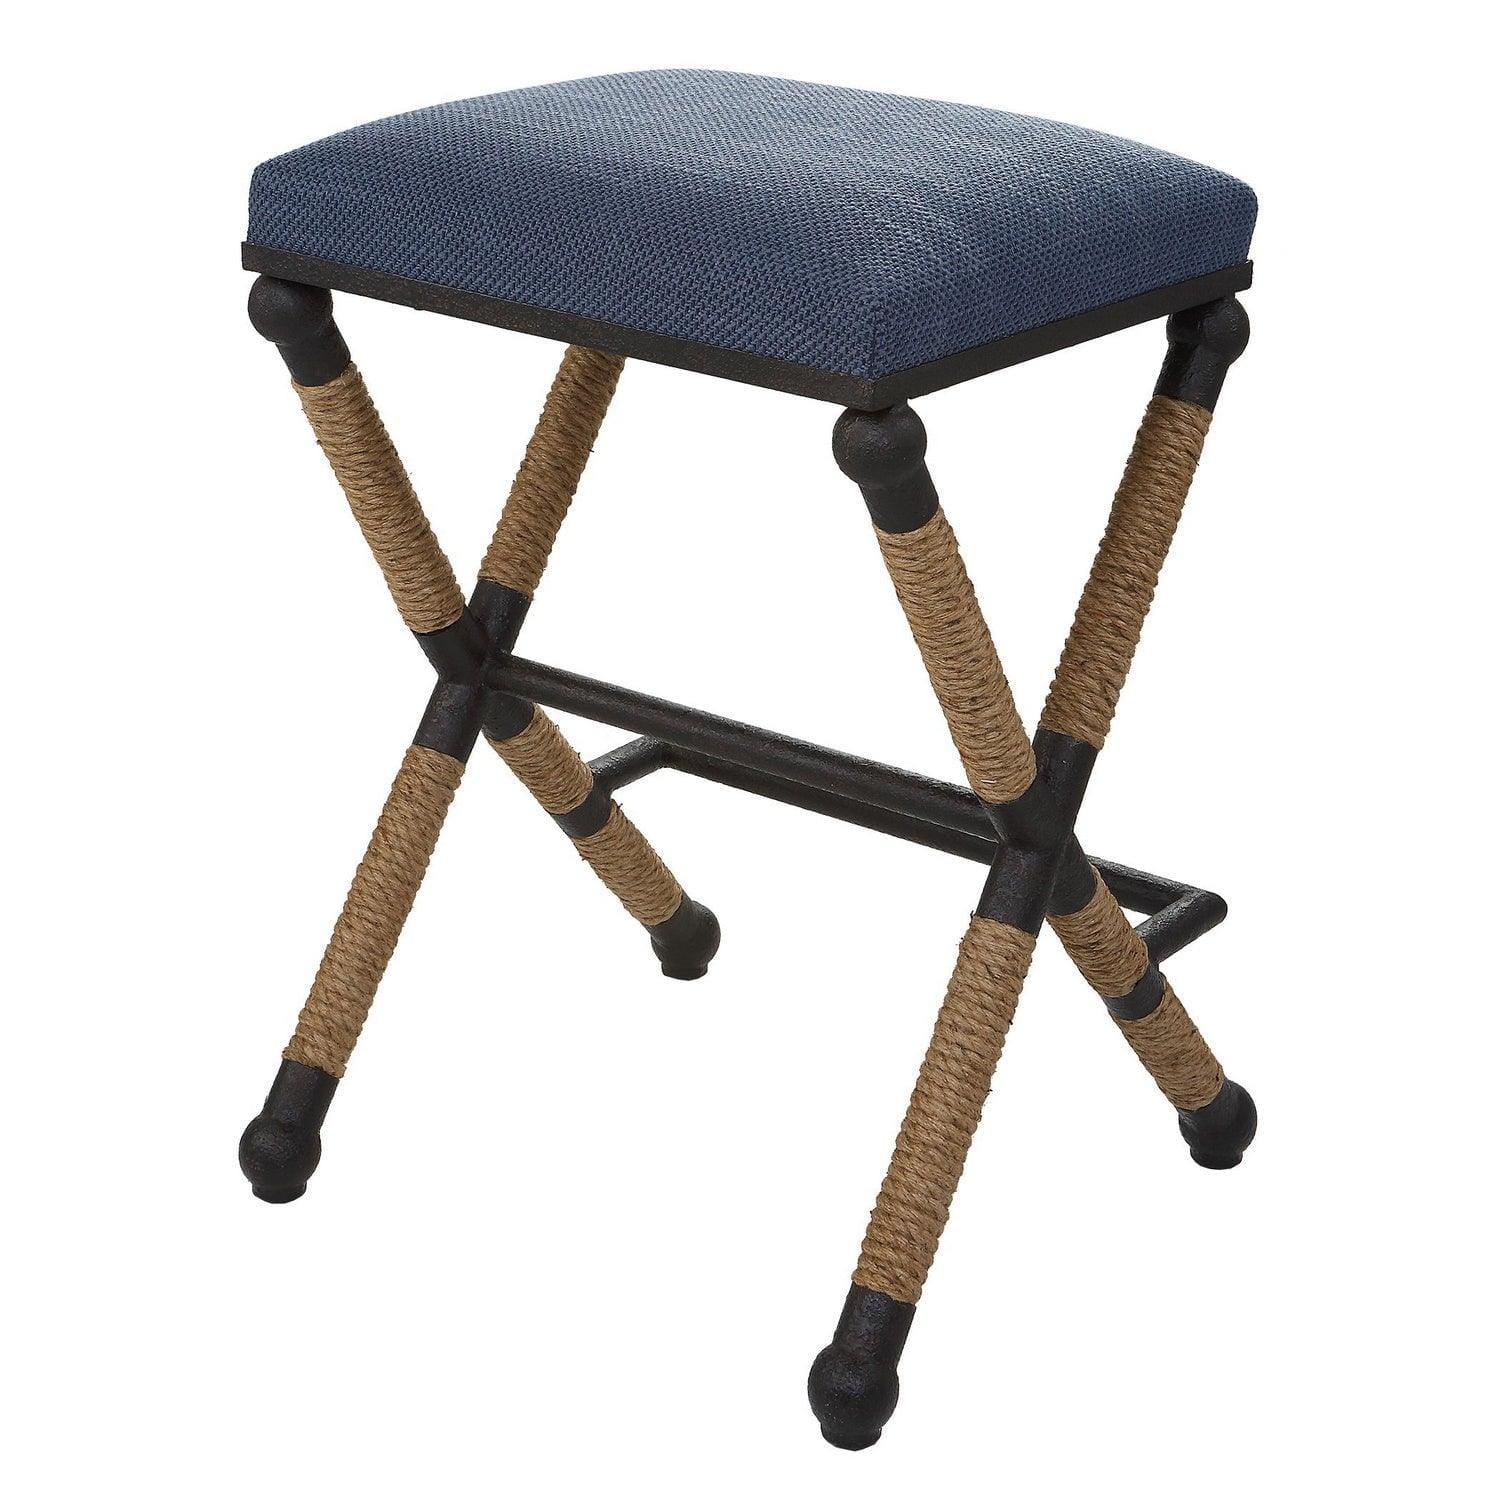 The Uttermost - Firth Rustic Counter Stool - 23710 | Montreal Lighting & Hardware